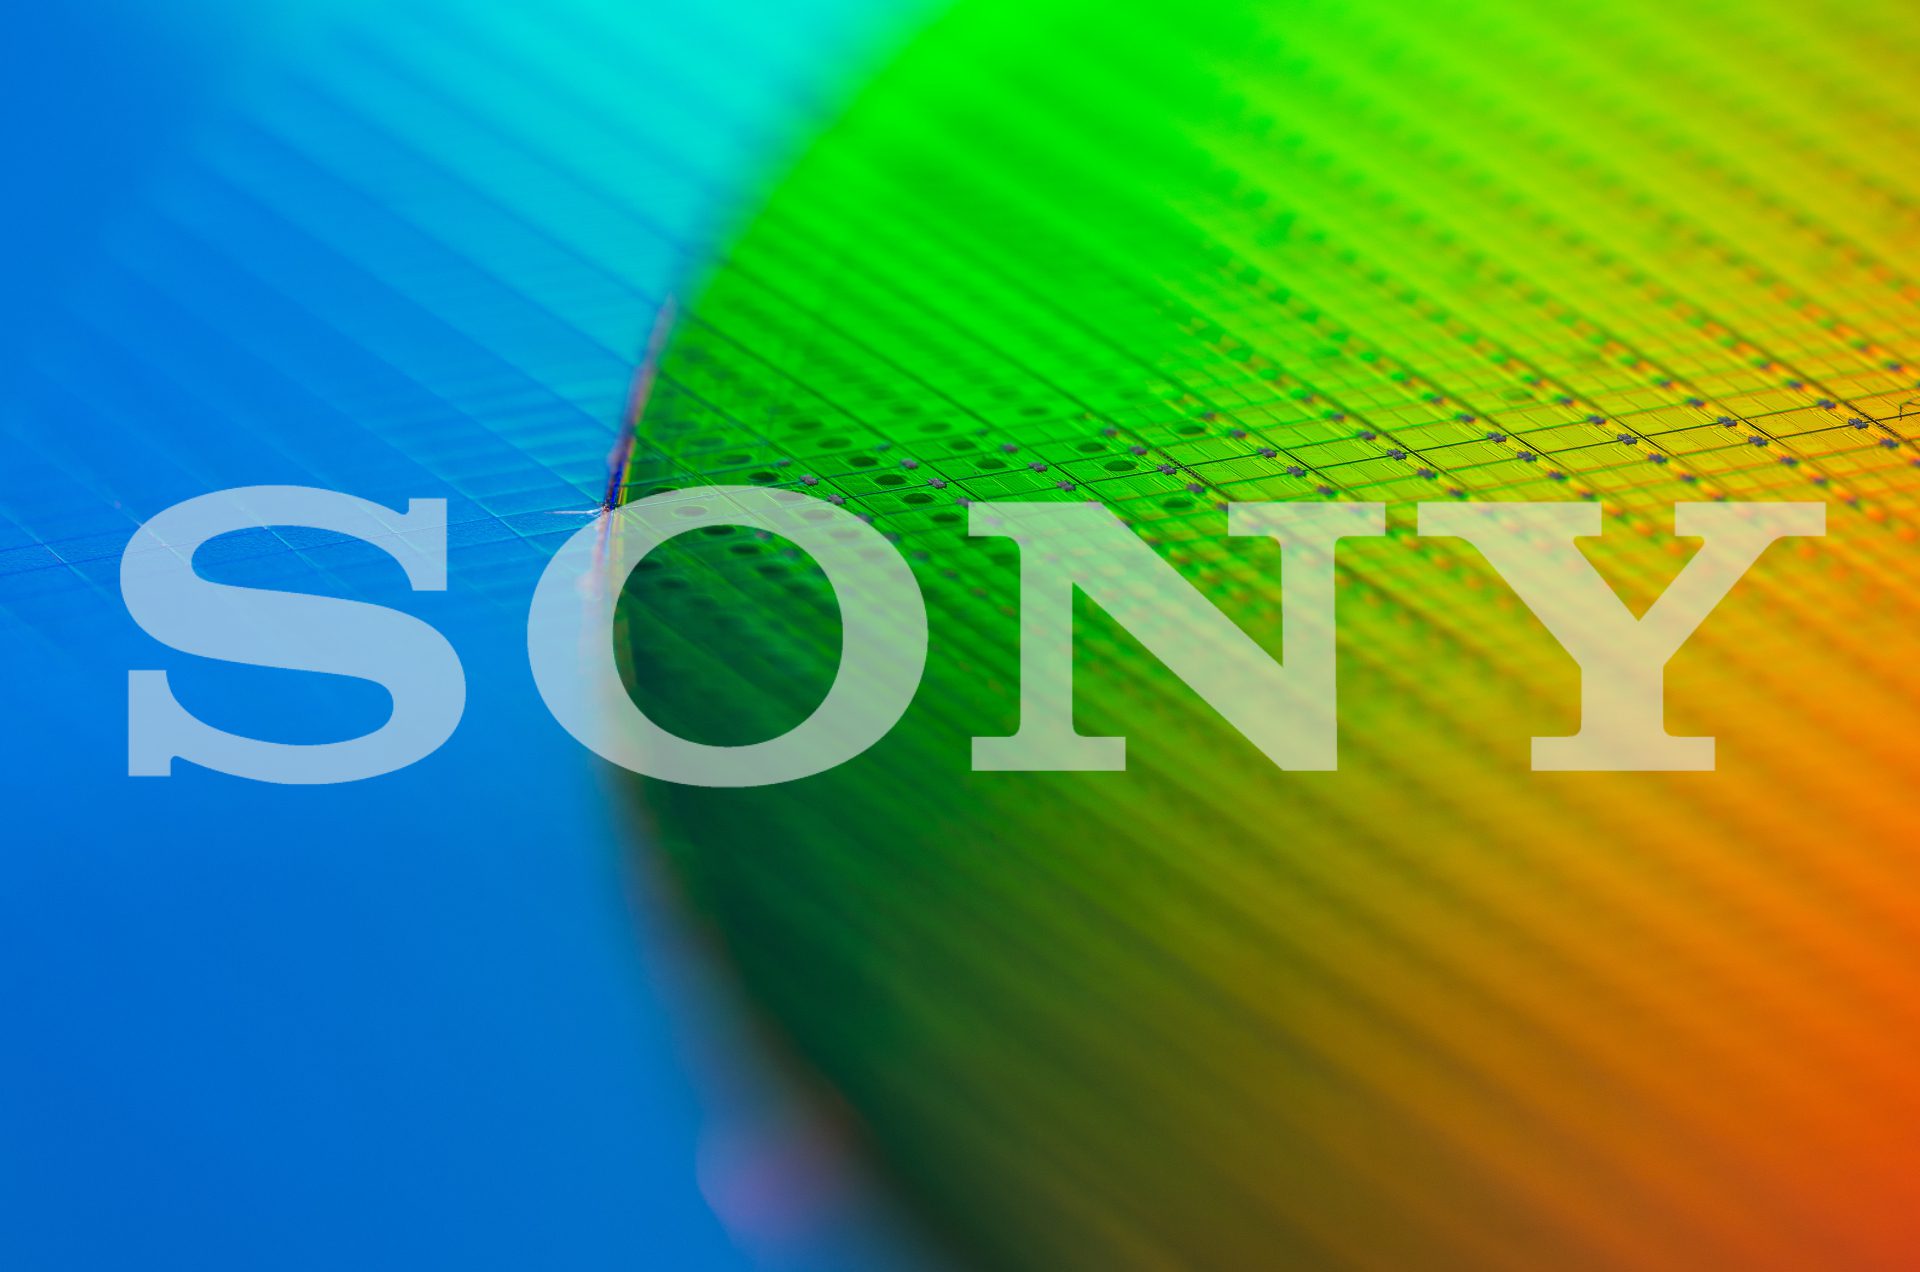 Sony investigates cyberattack as hackers fight over who's responsible